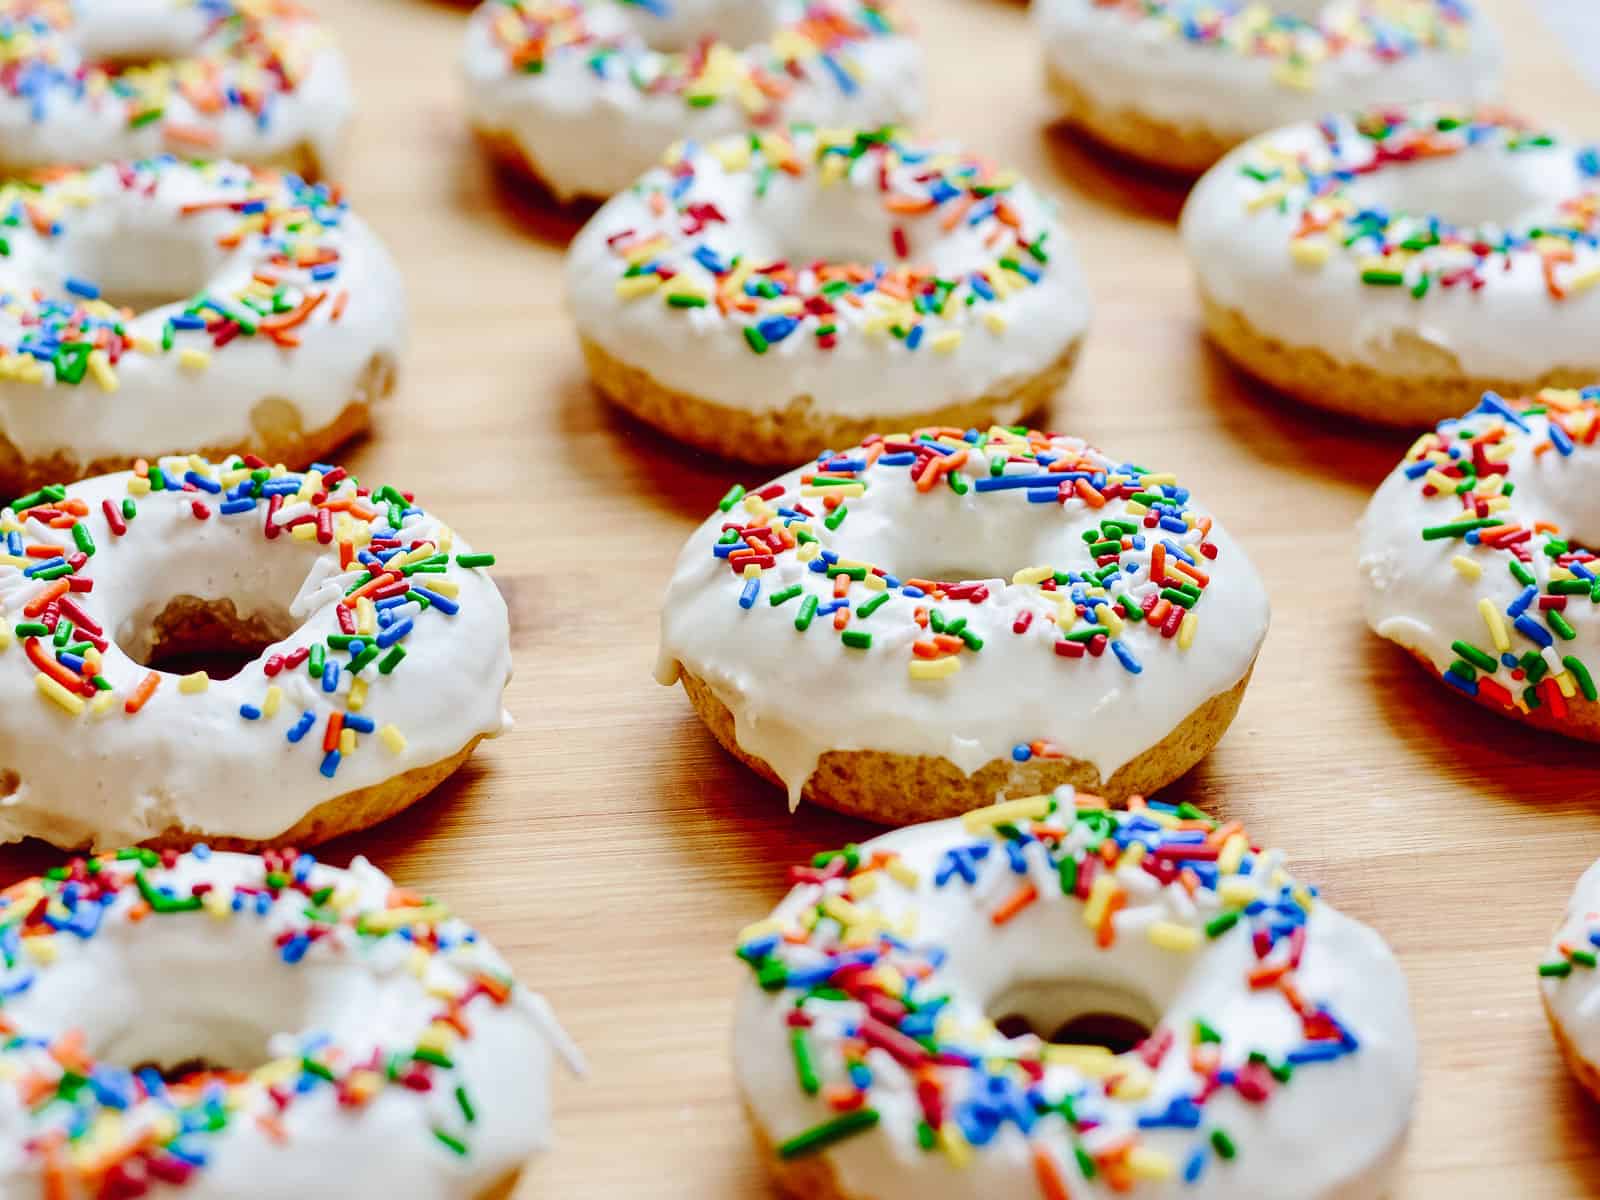 Donuts lined up in a row with vanilla frosting and sprinkles.